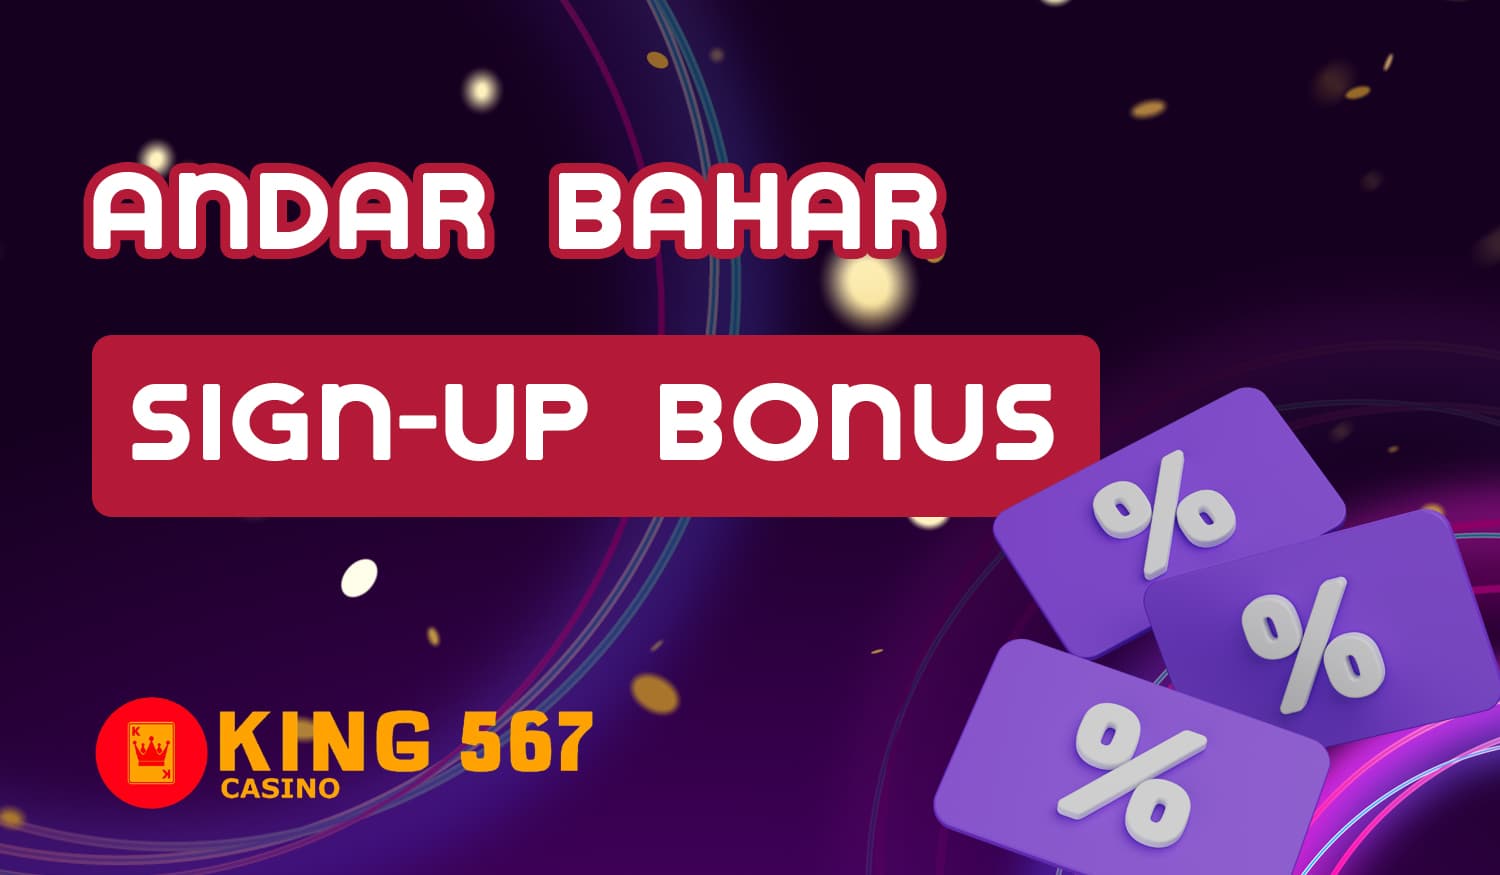 Welcome Bonus from King 567 Casino which will be given to all new users of the casino section